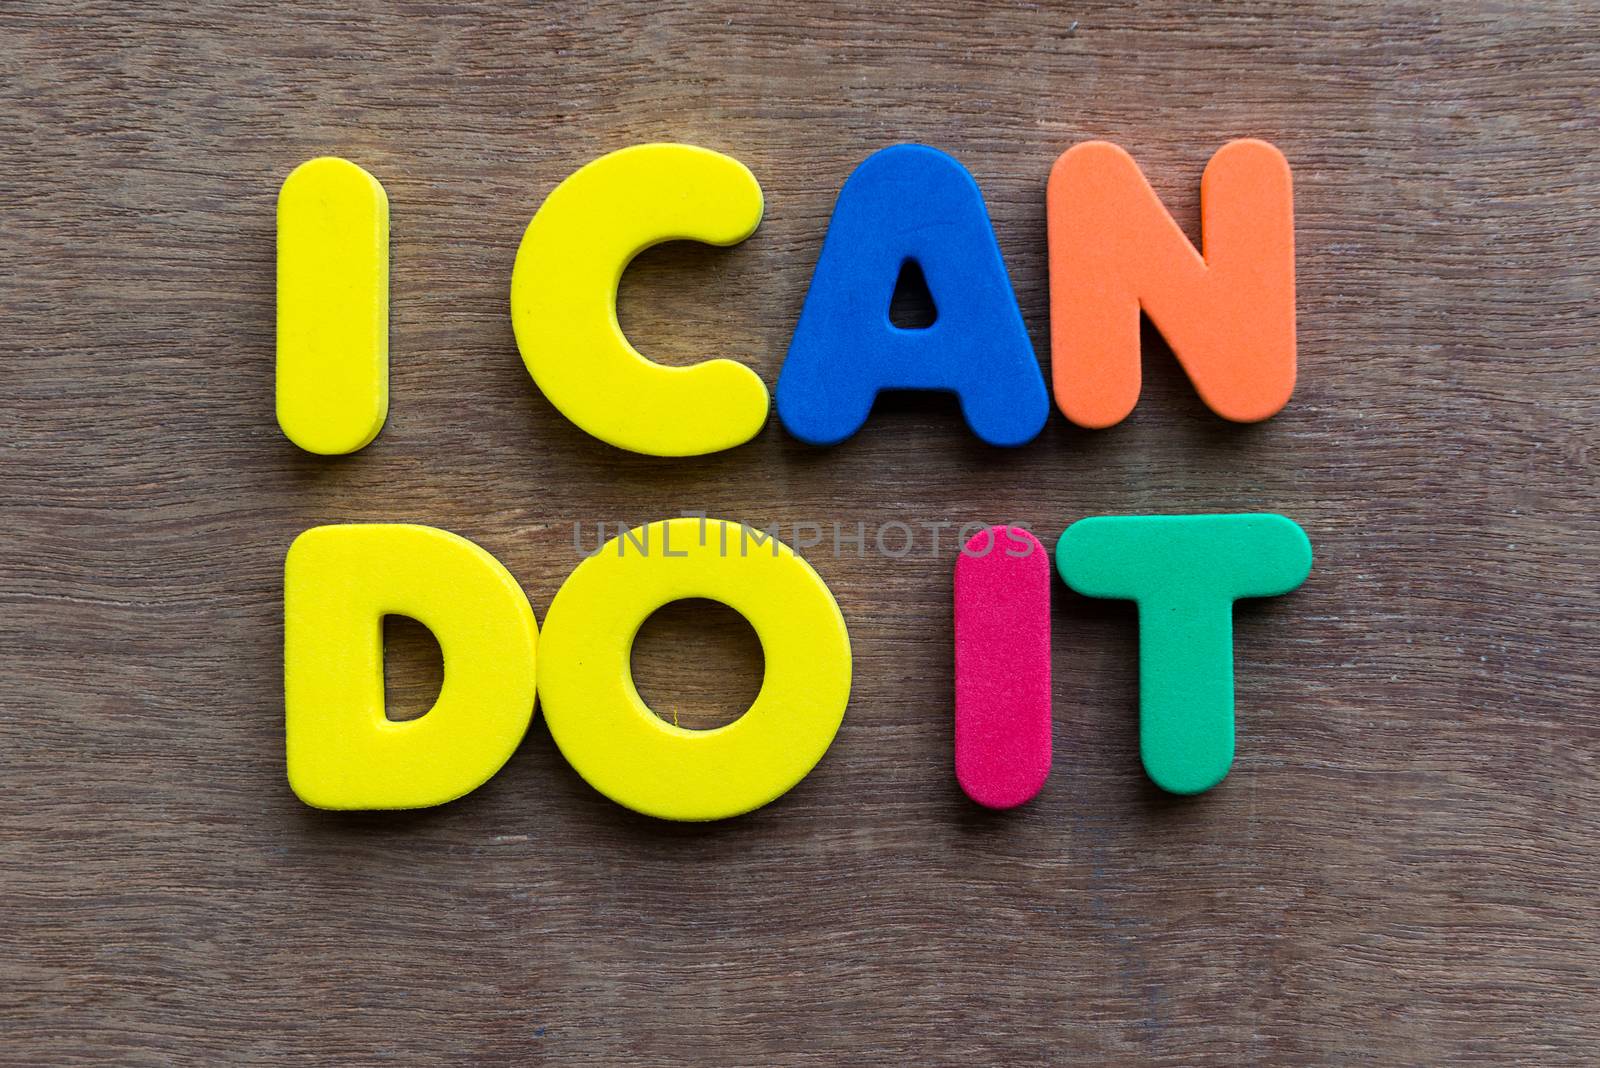 i can do it words in wood background